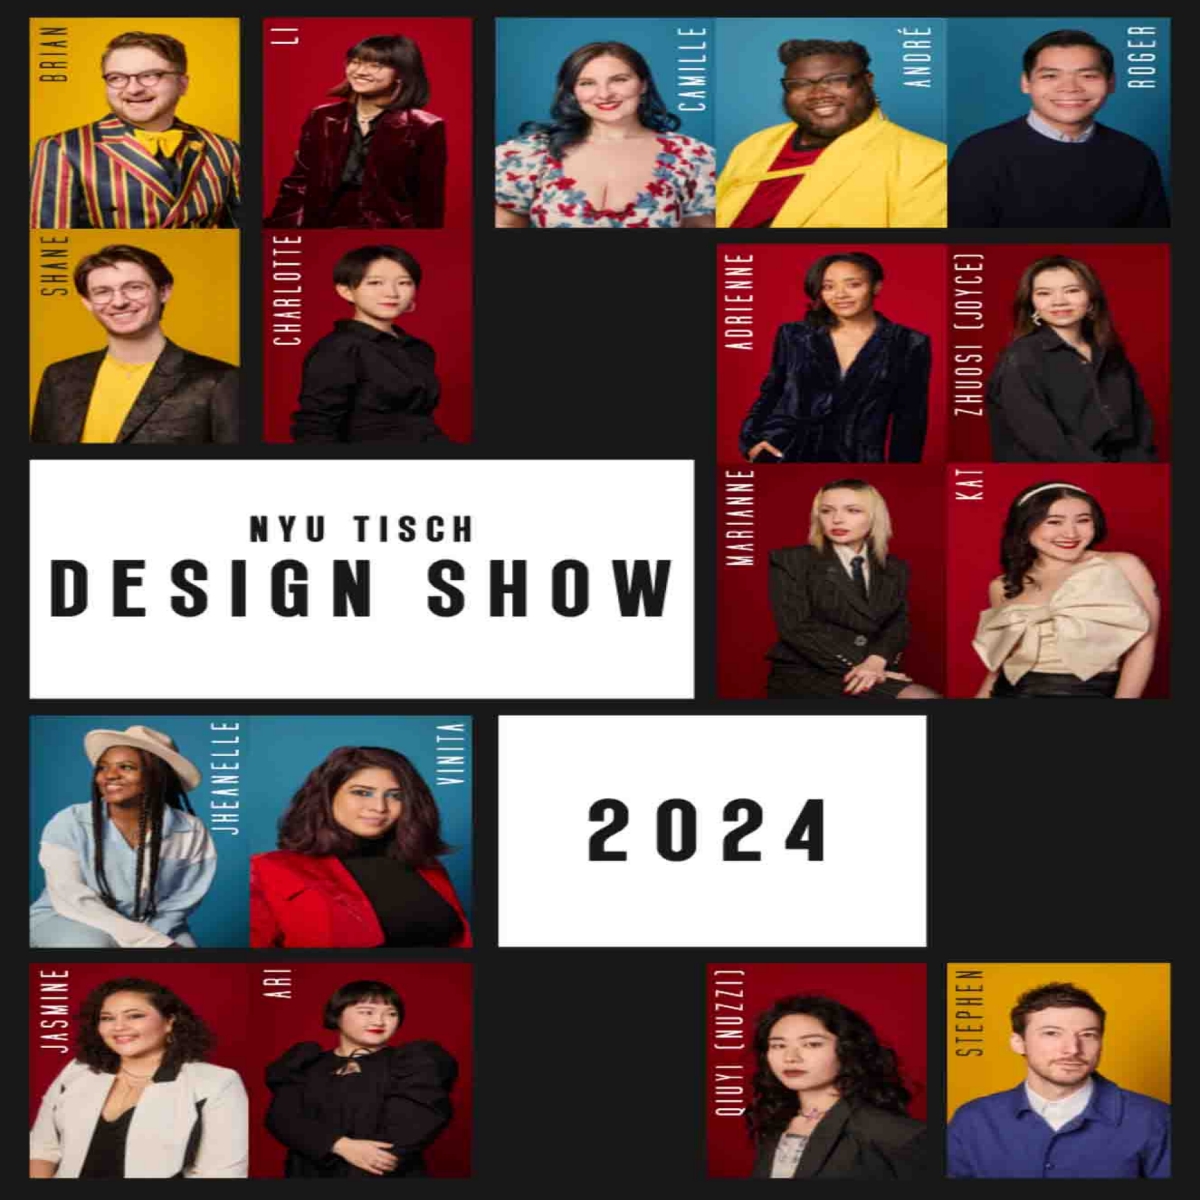 Design Show flyer with student headshots